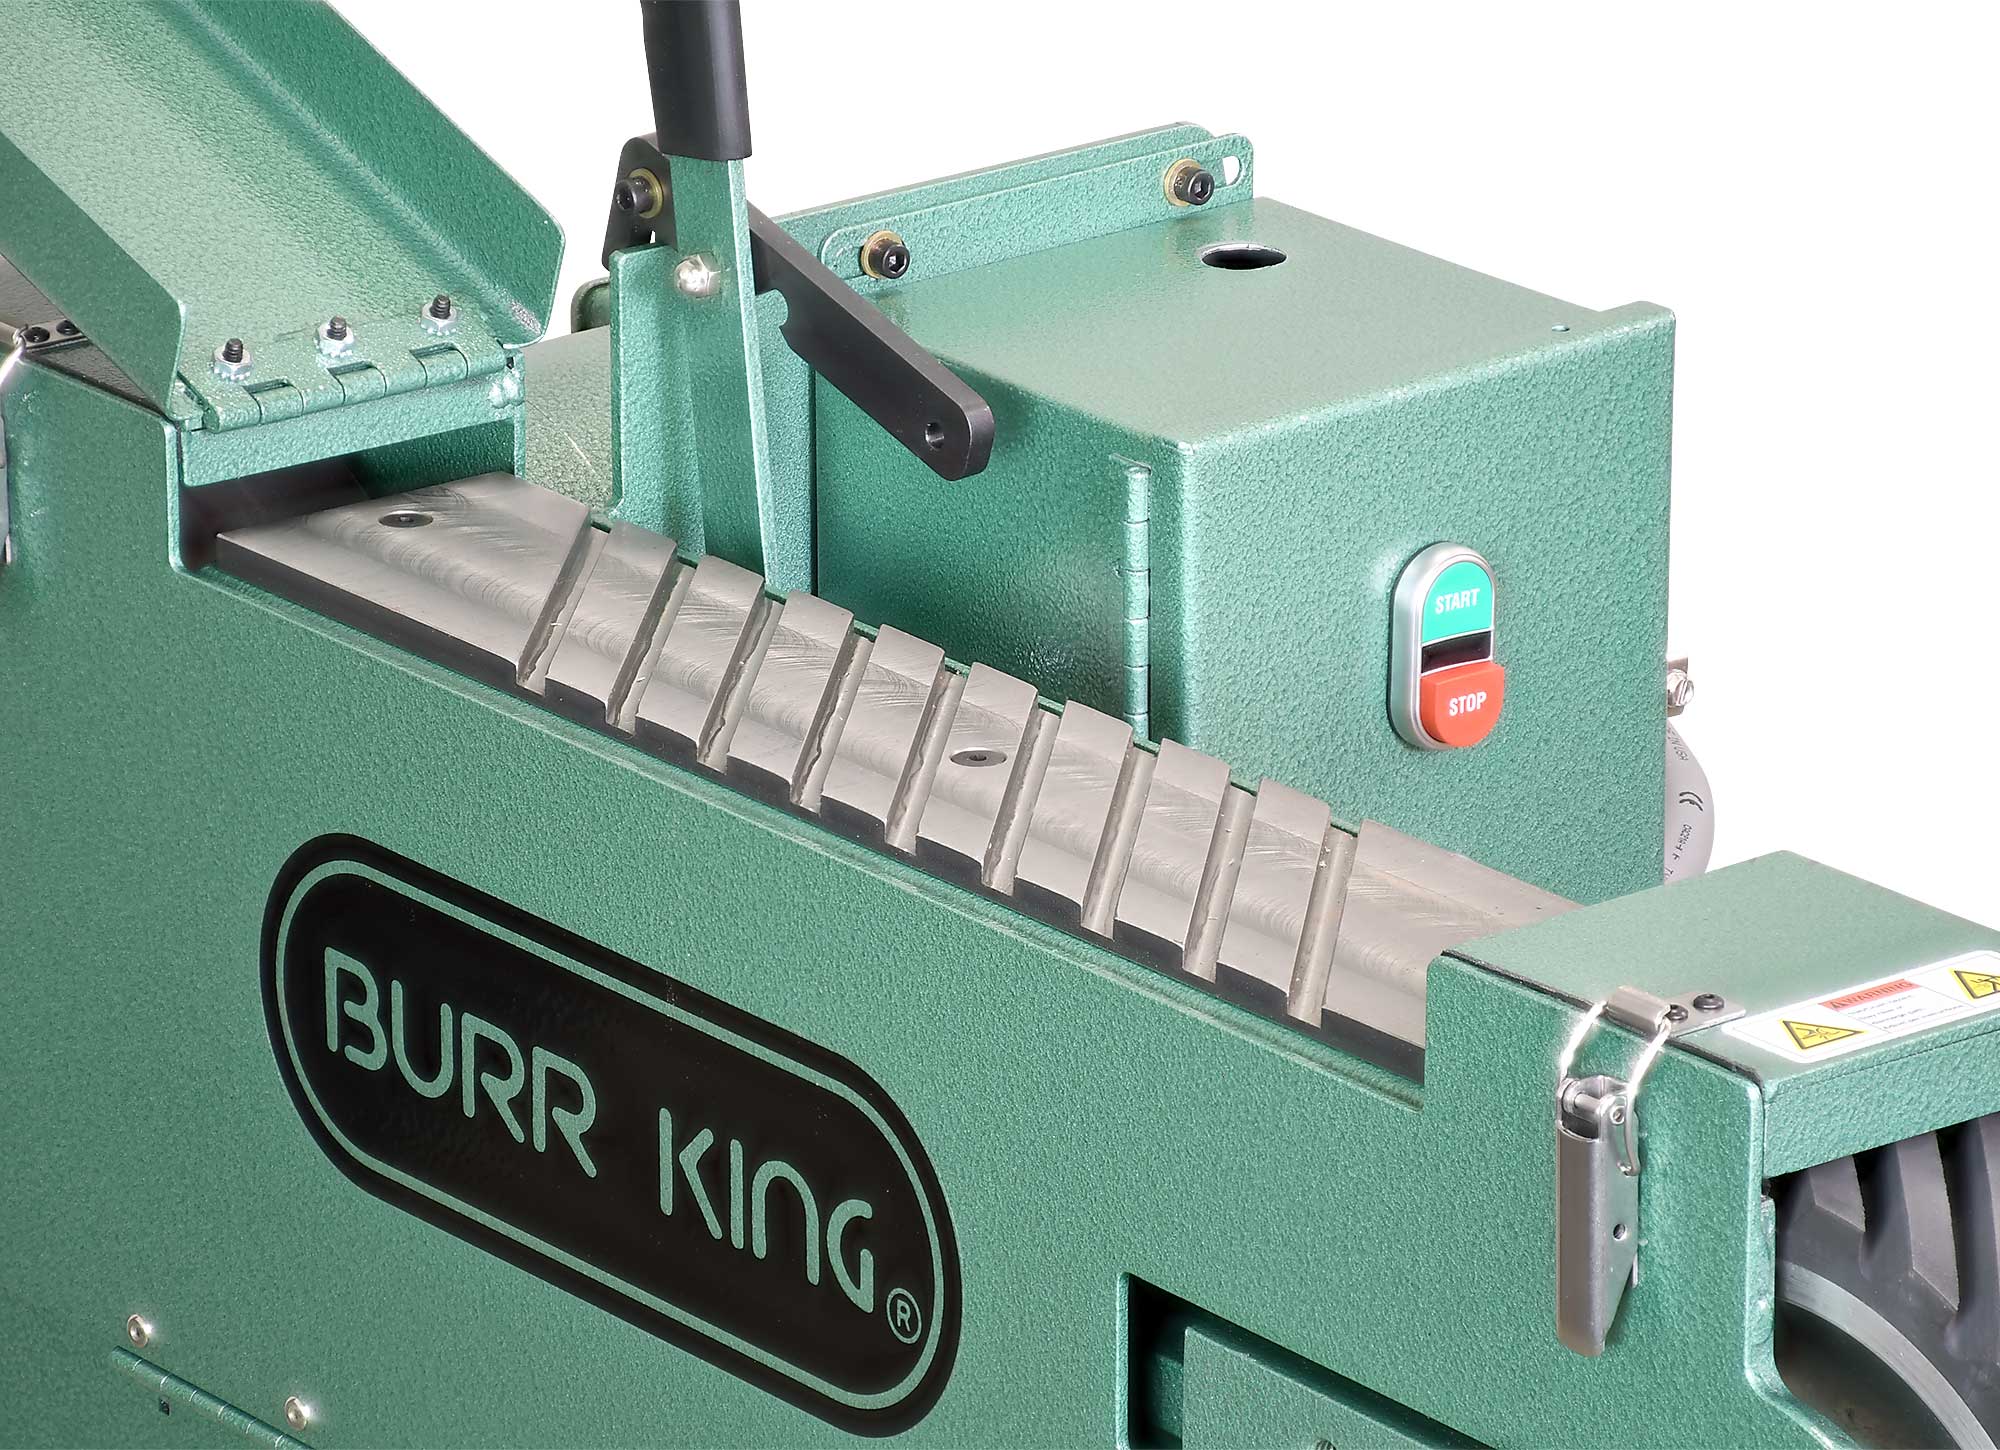 The serrated steel platen is a user replaceable feature that you will not find on other non-Burr King grinders.